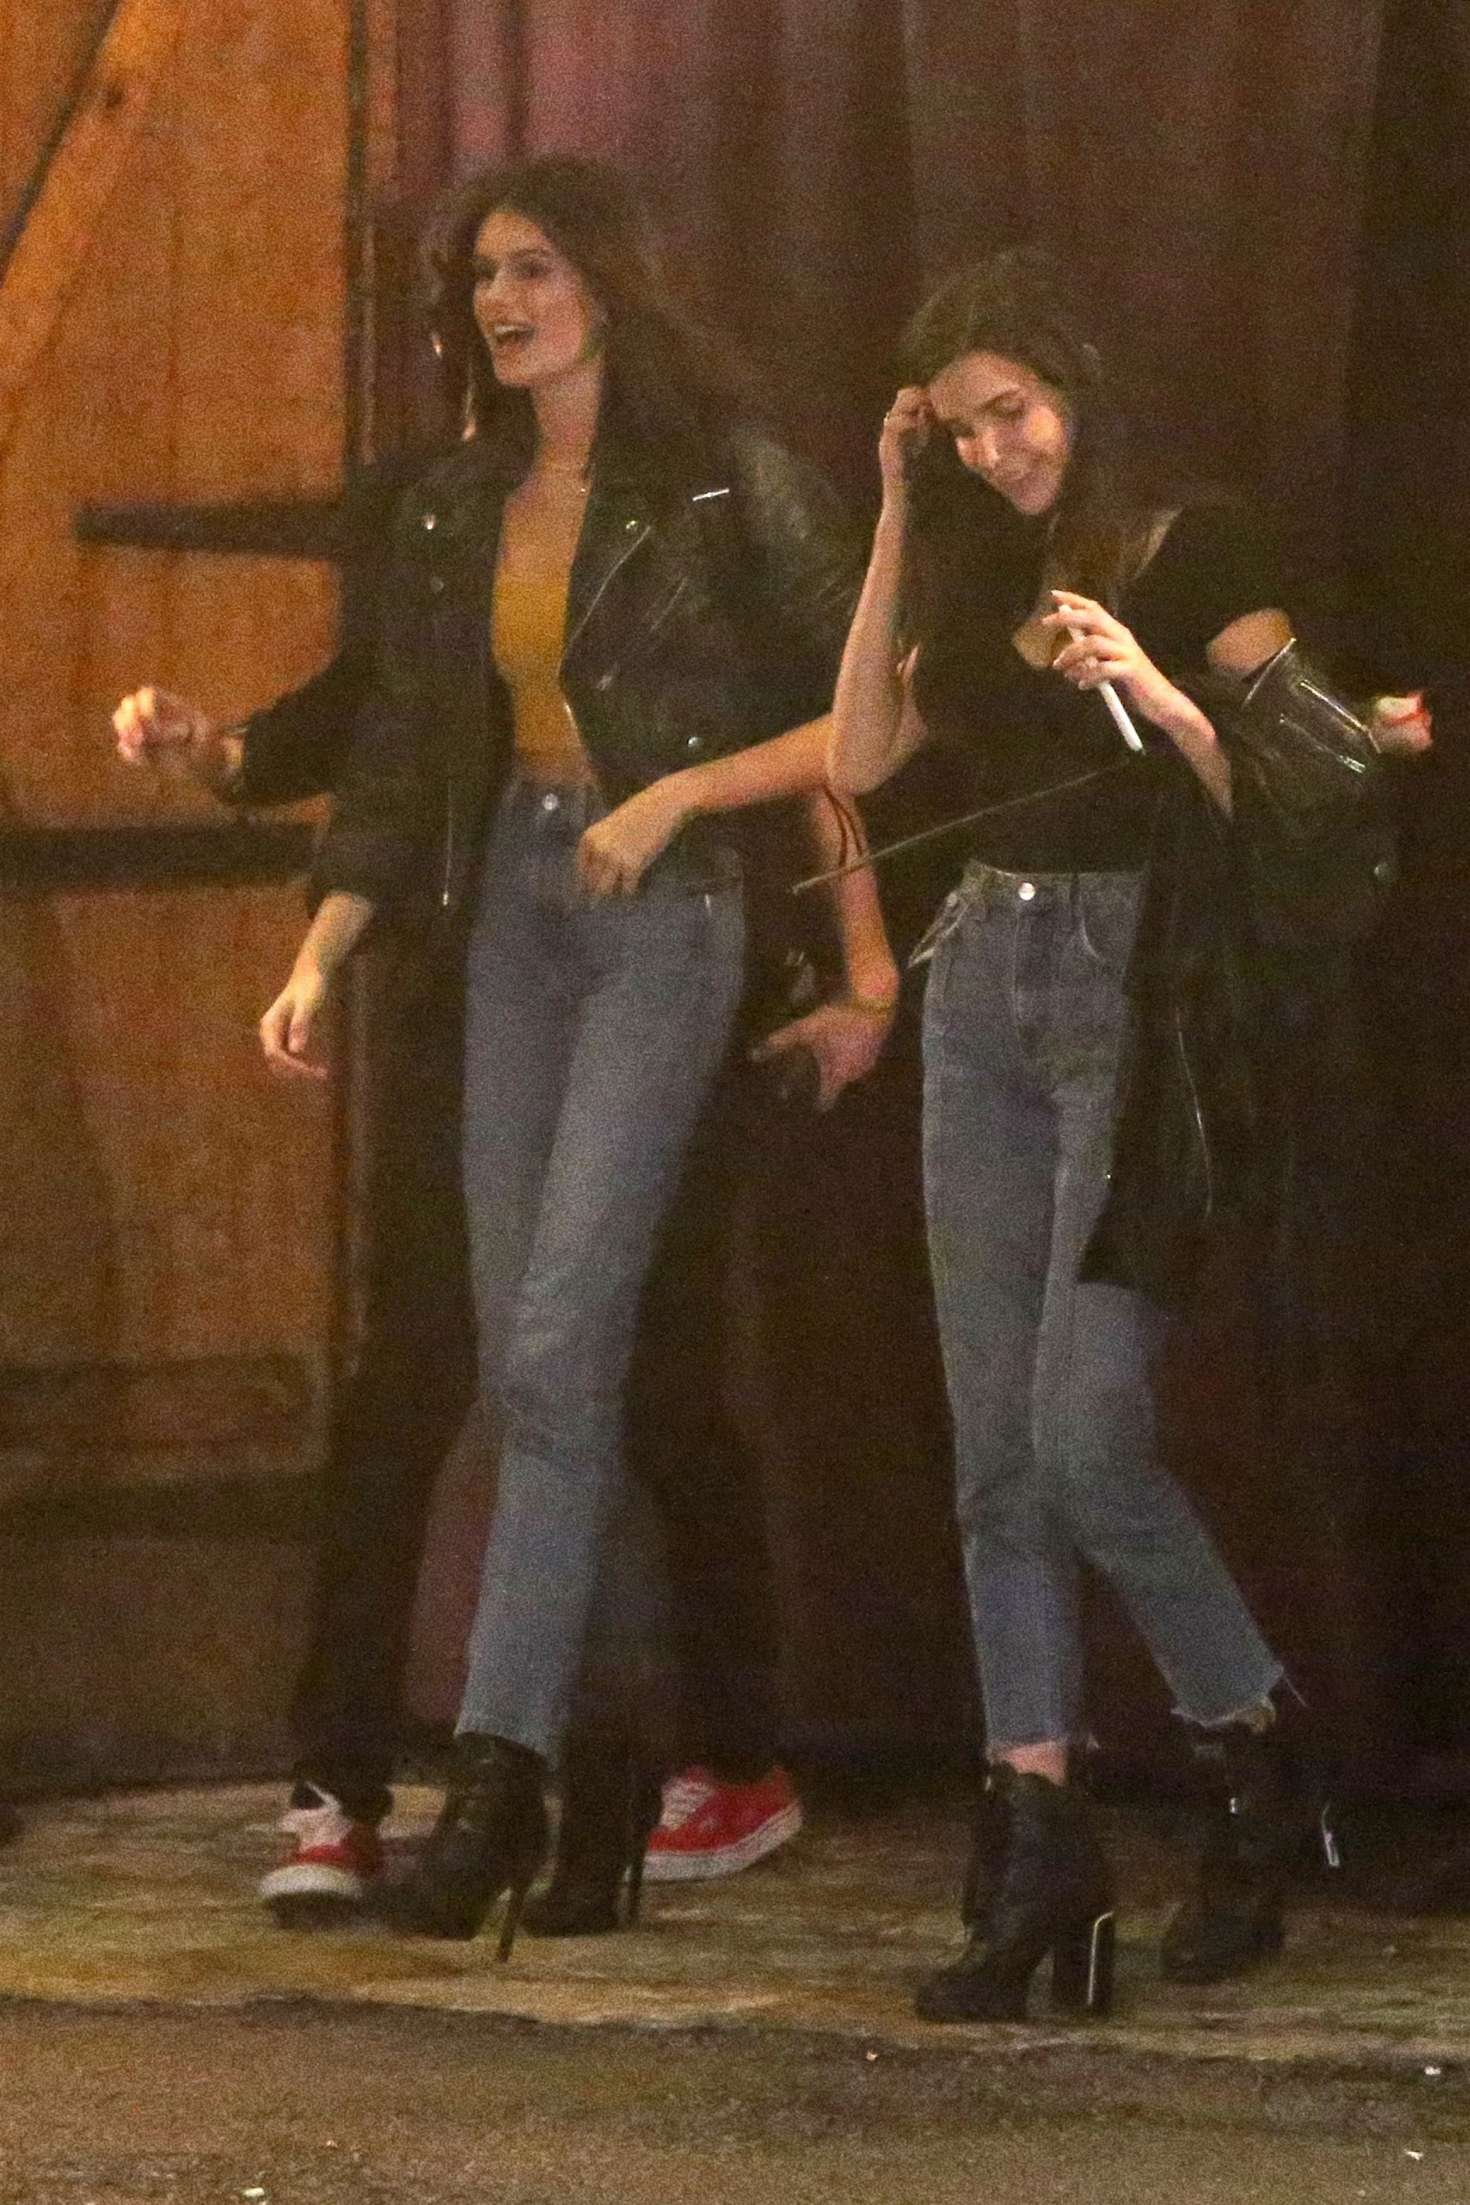 Kaia Gerber at The Saddle Ranch in West Hollywood